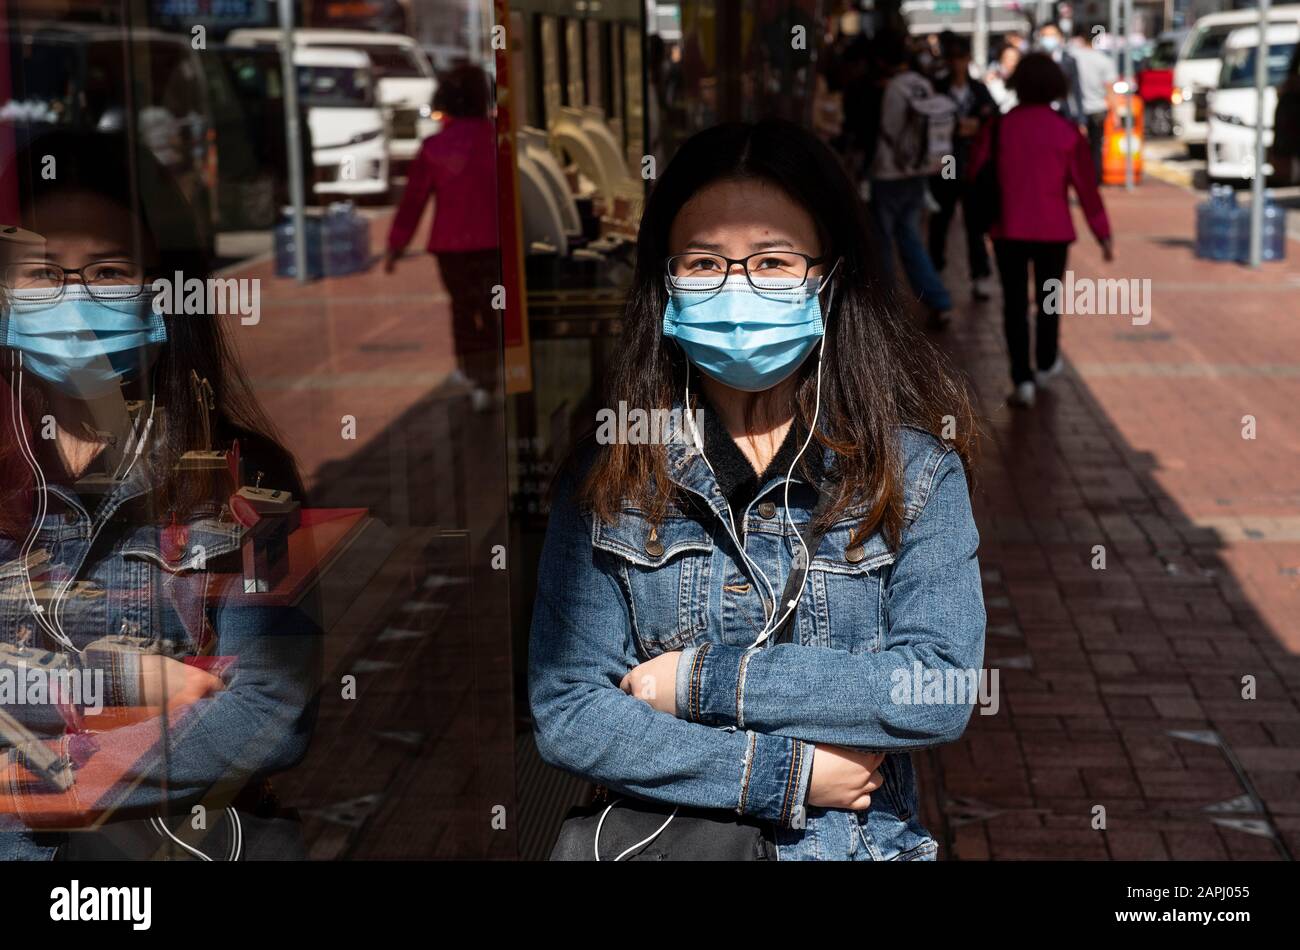 A pedestrian covers her face with a  sanitary mask after the first cases of coronavirus have been confirmed in Hong Kong. China has implemented a public transportation and airport lock down into different cities to slow down the spread of the Wuhan coronavirus. Stock Photo